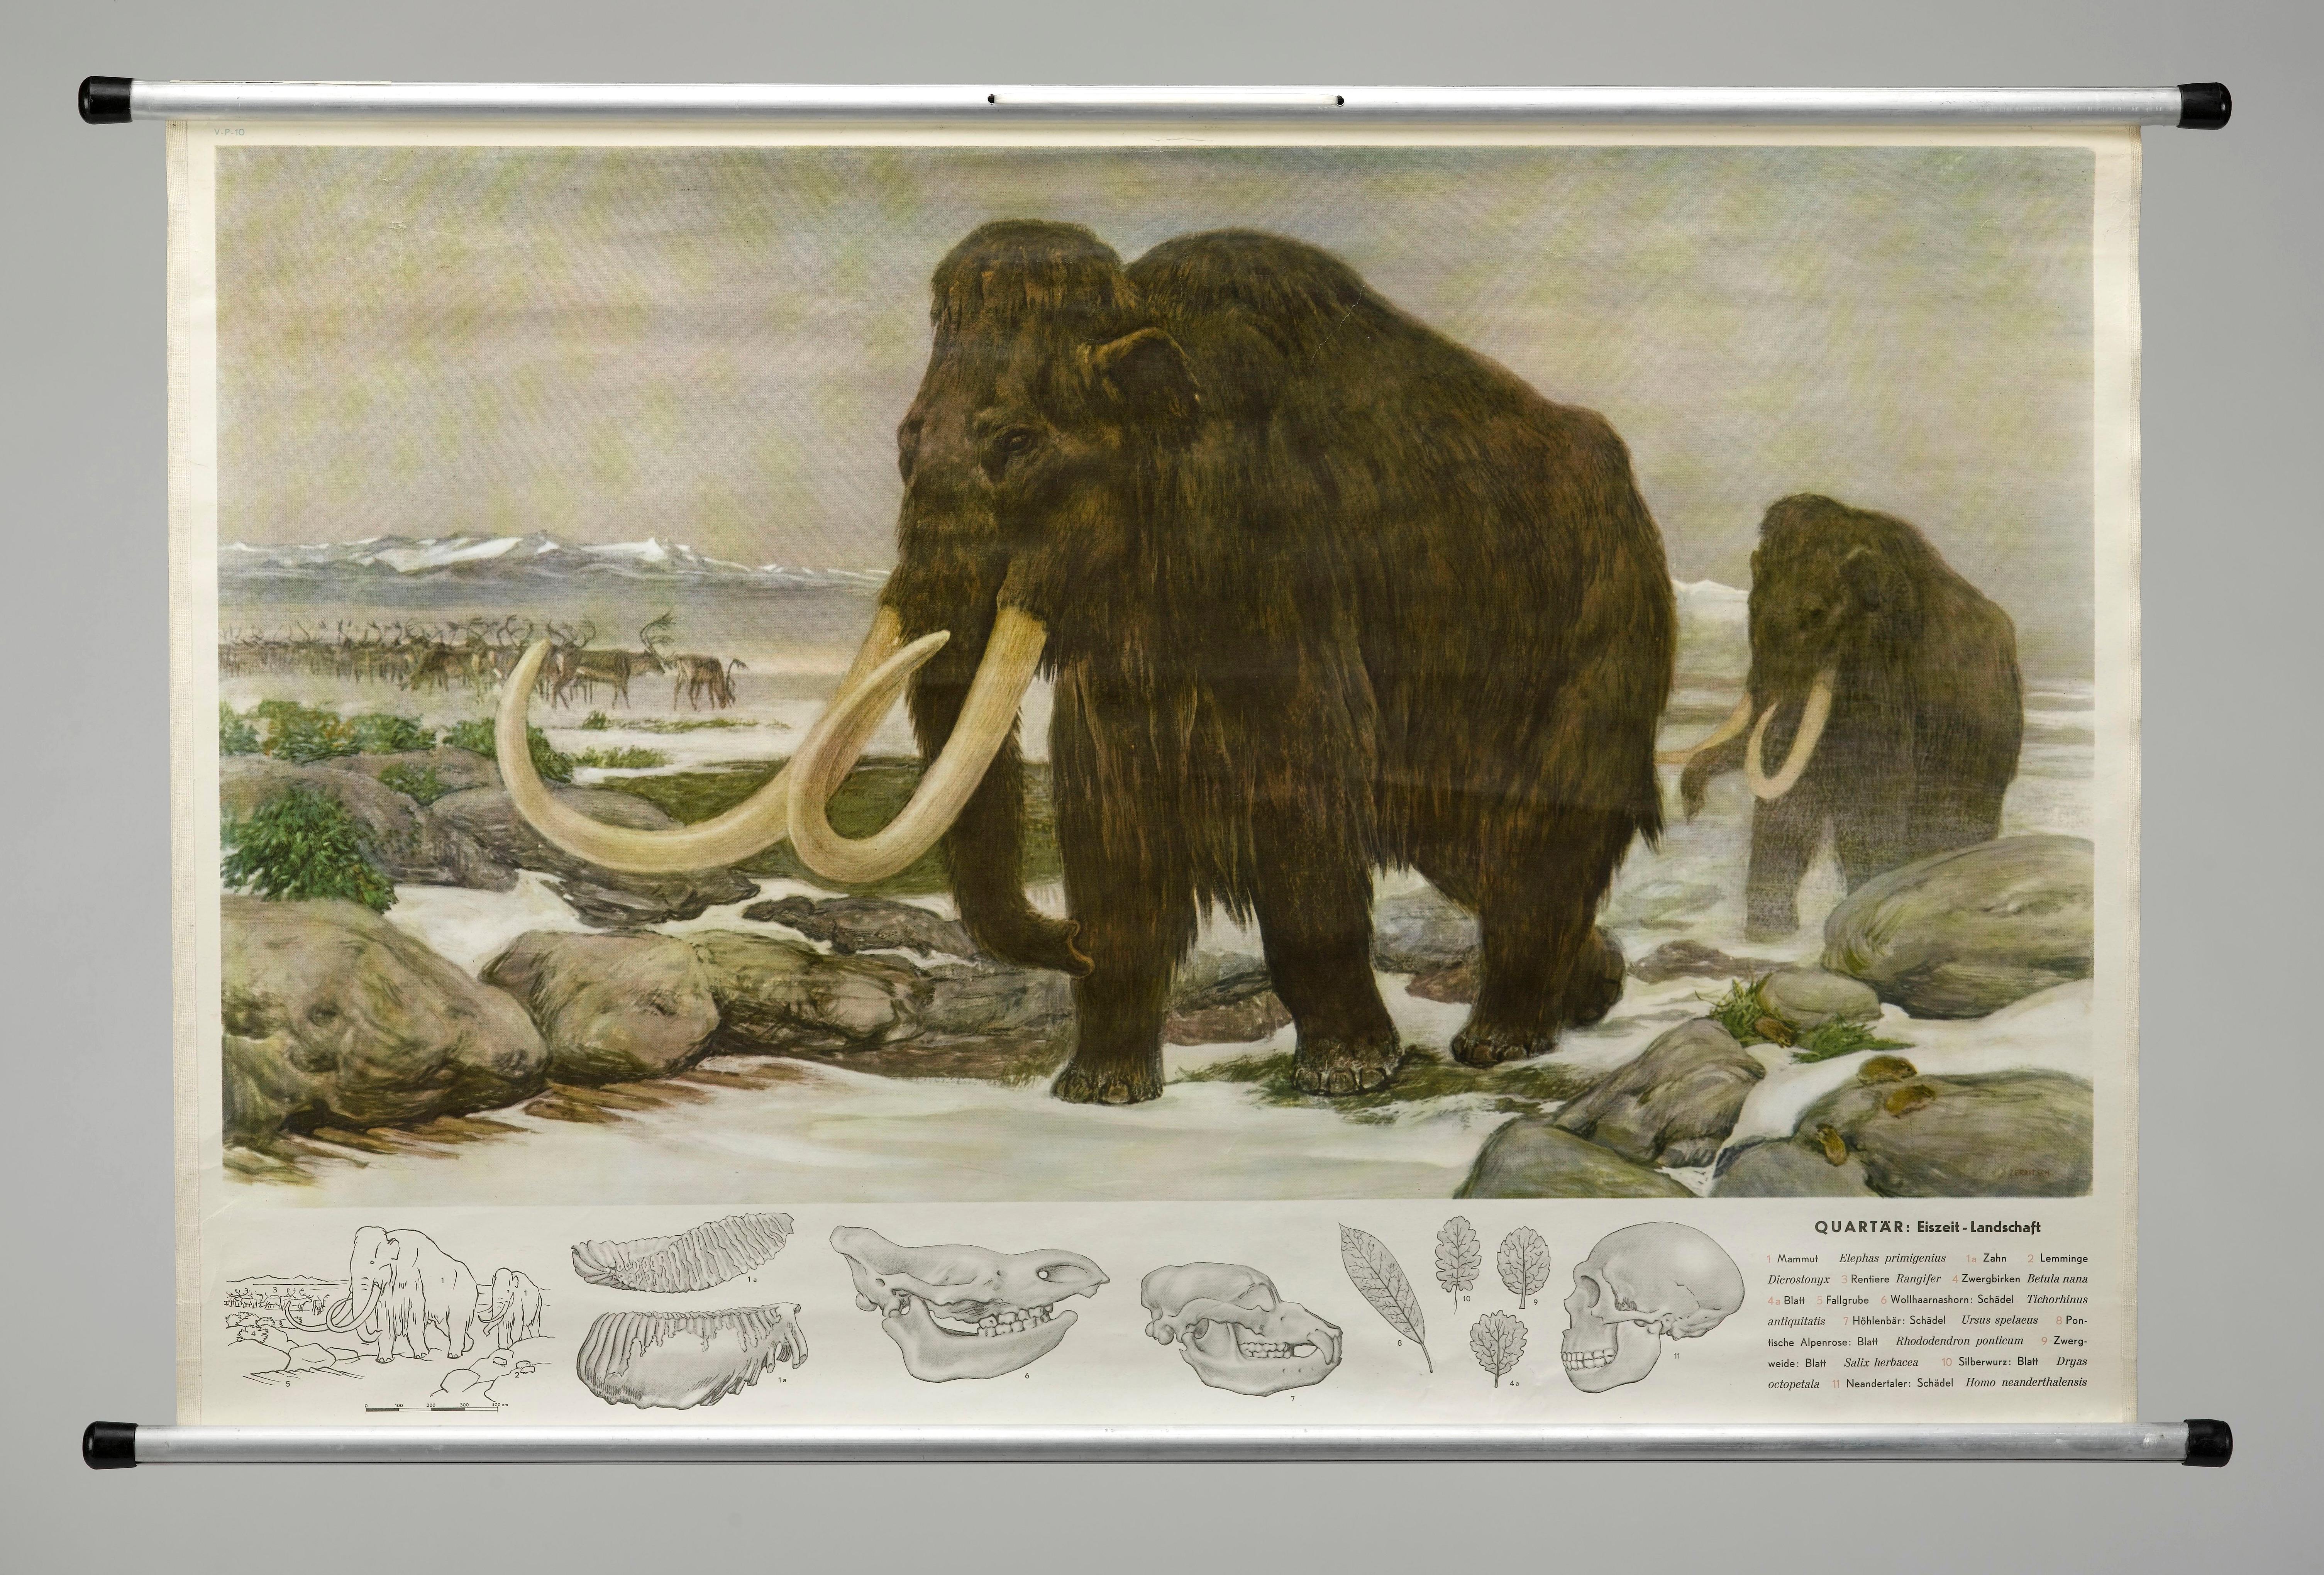 1955 „Quaternary: Ice-Age Landscape“ Wolle Mammoth Vintage Wandbehang  (Metall) im Angebot